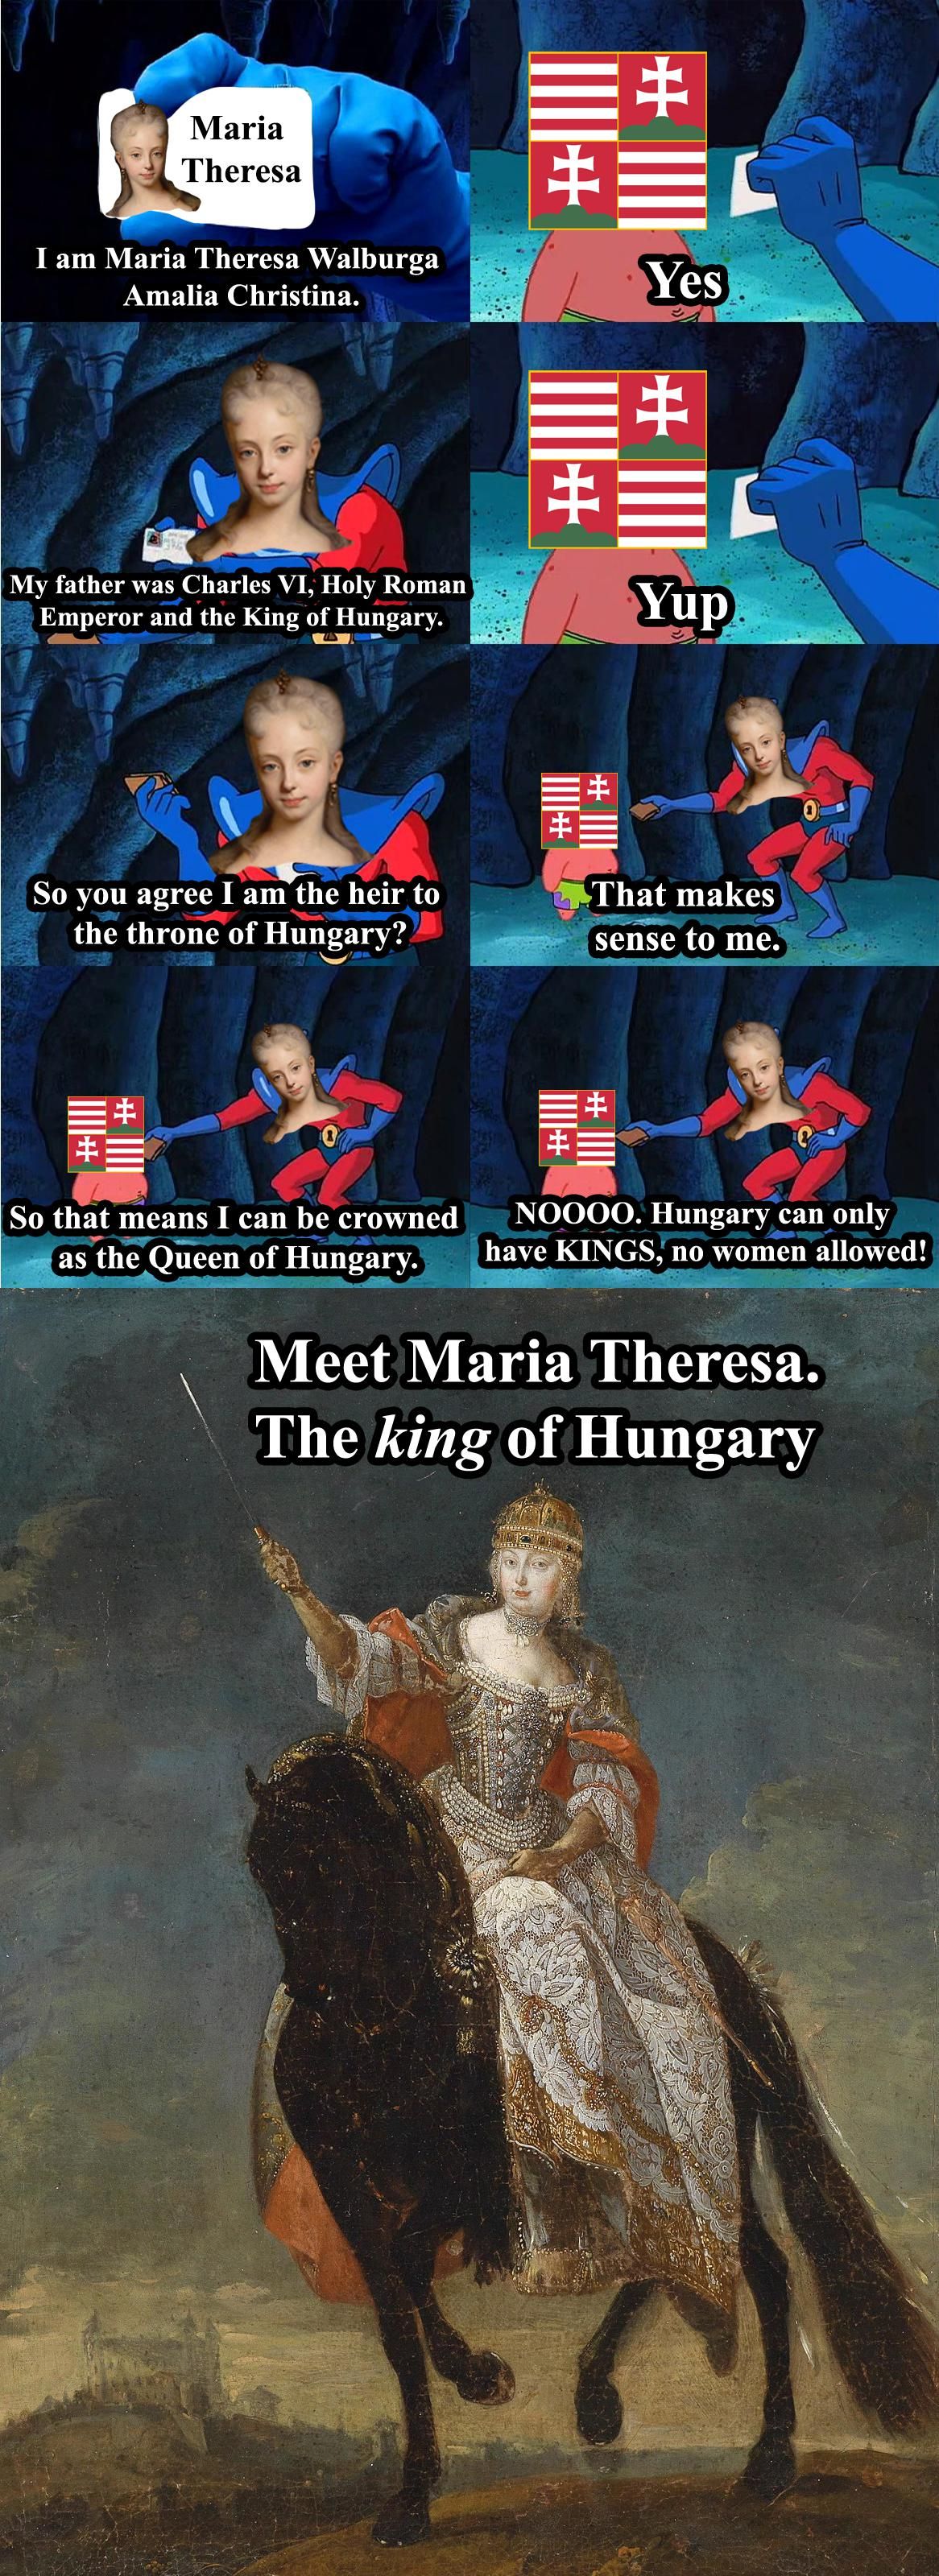 Maria Theresa had to be crowned as the 'King' of Hungary because there was no provision for female rule in Hungarian law.